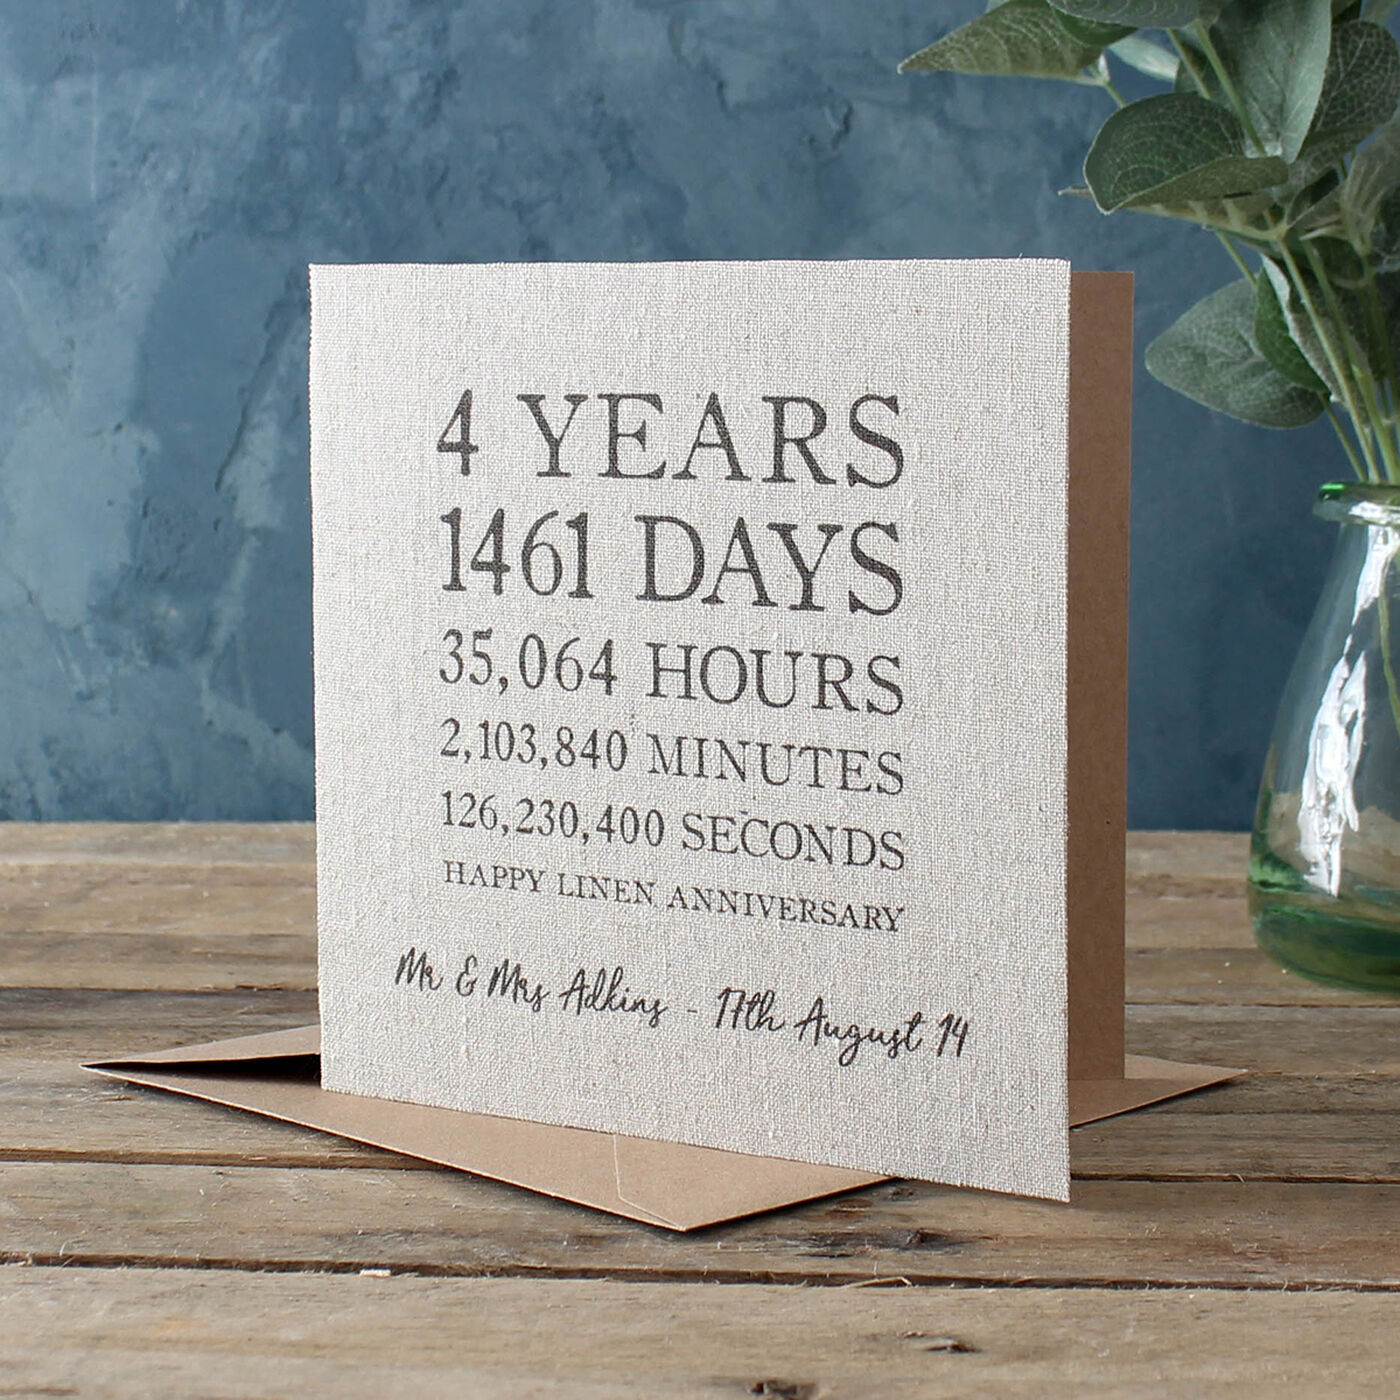 Personalised Husband Anniversary Gifts - Getting Personal